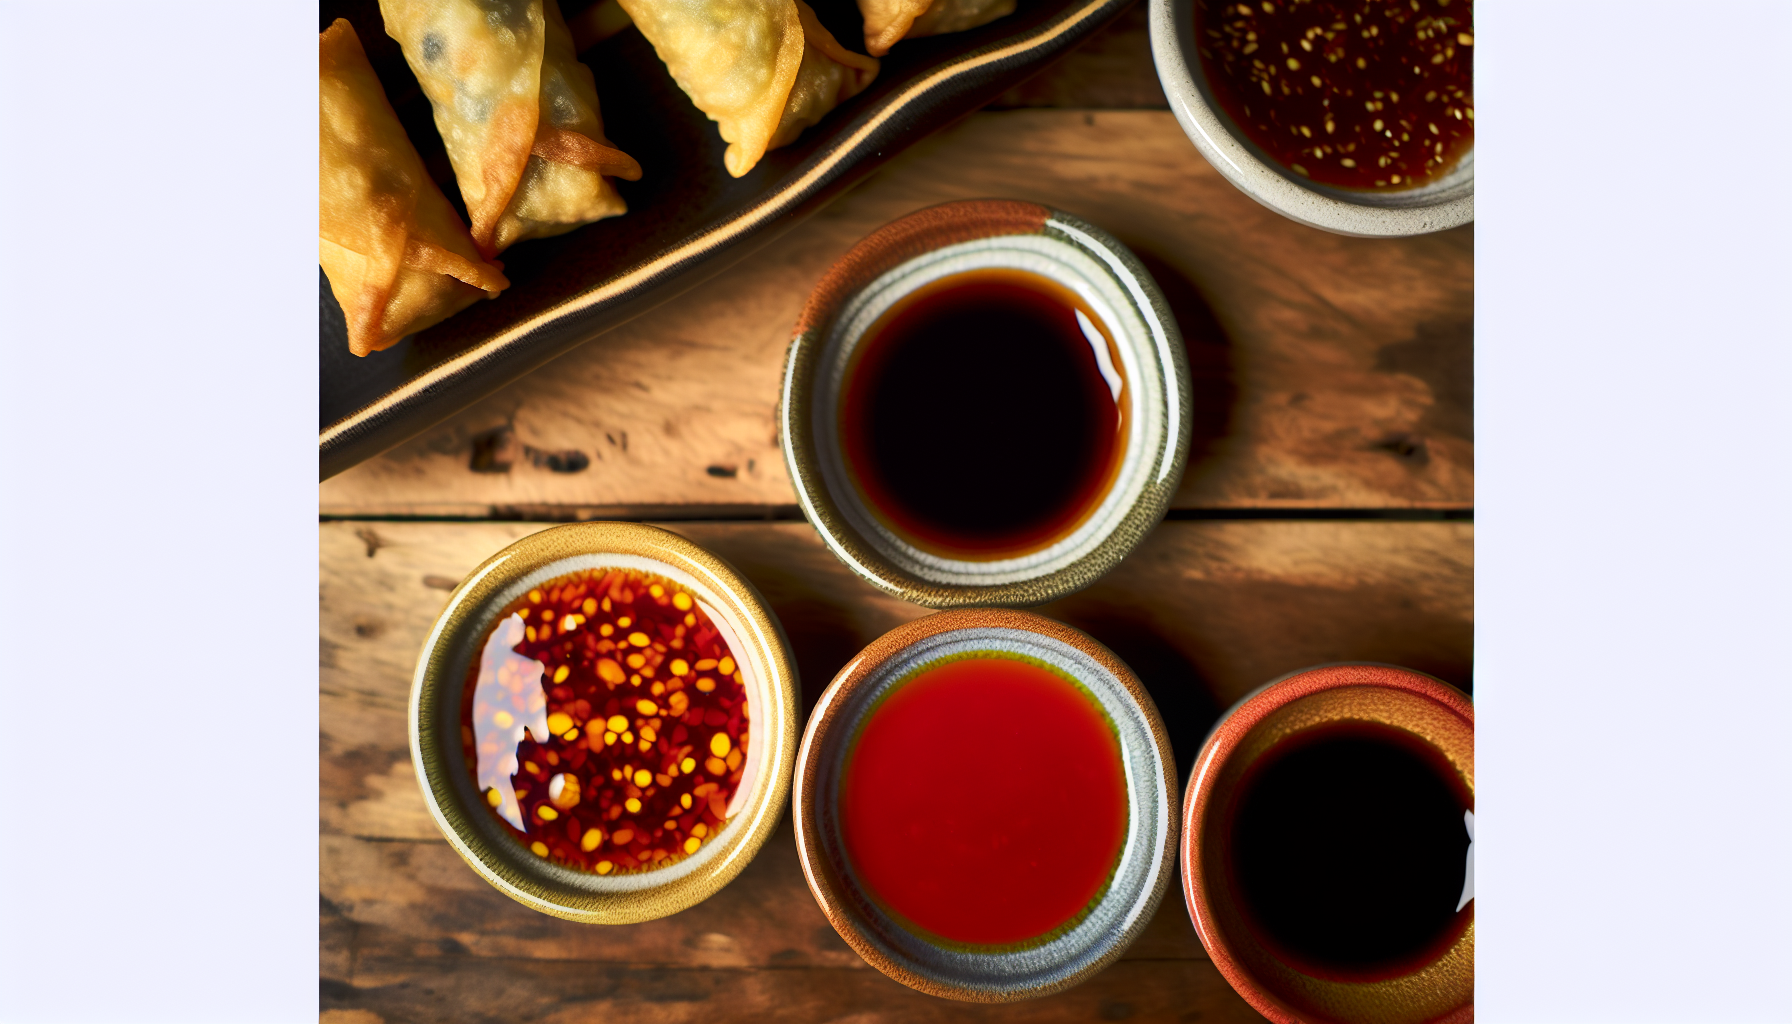 Assortment of small bowls with various dipping sauces for vegan egg rolls